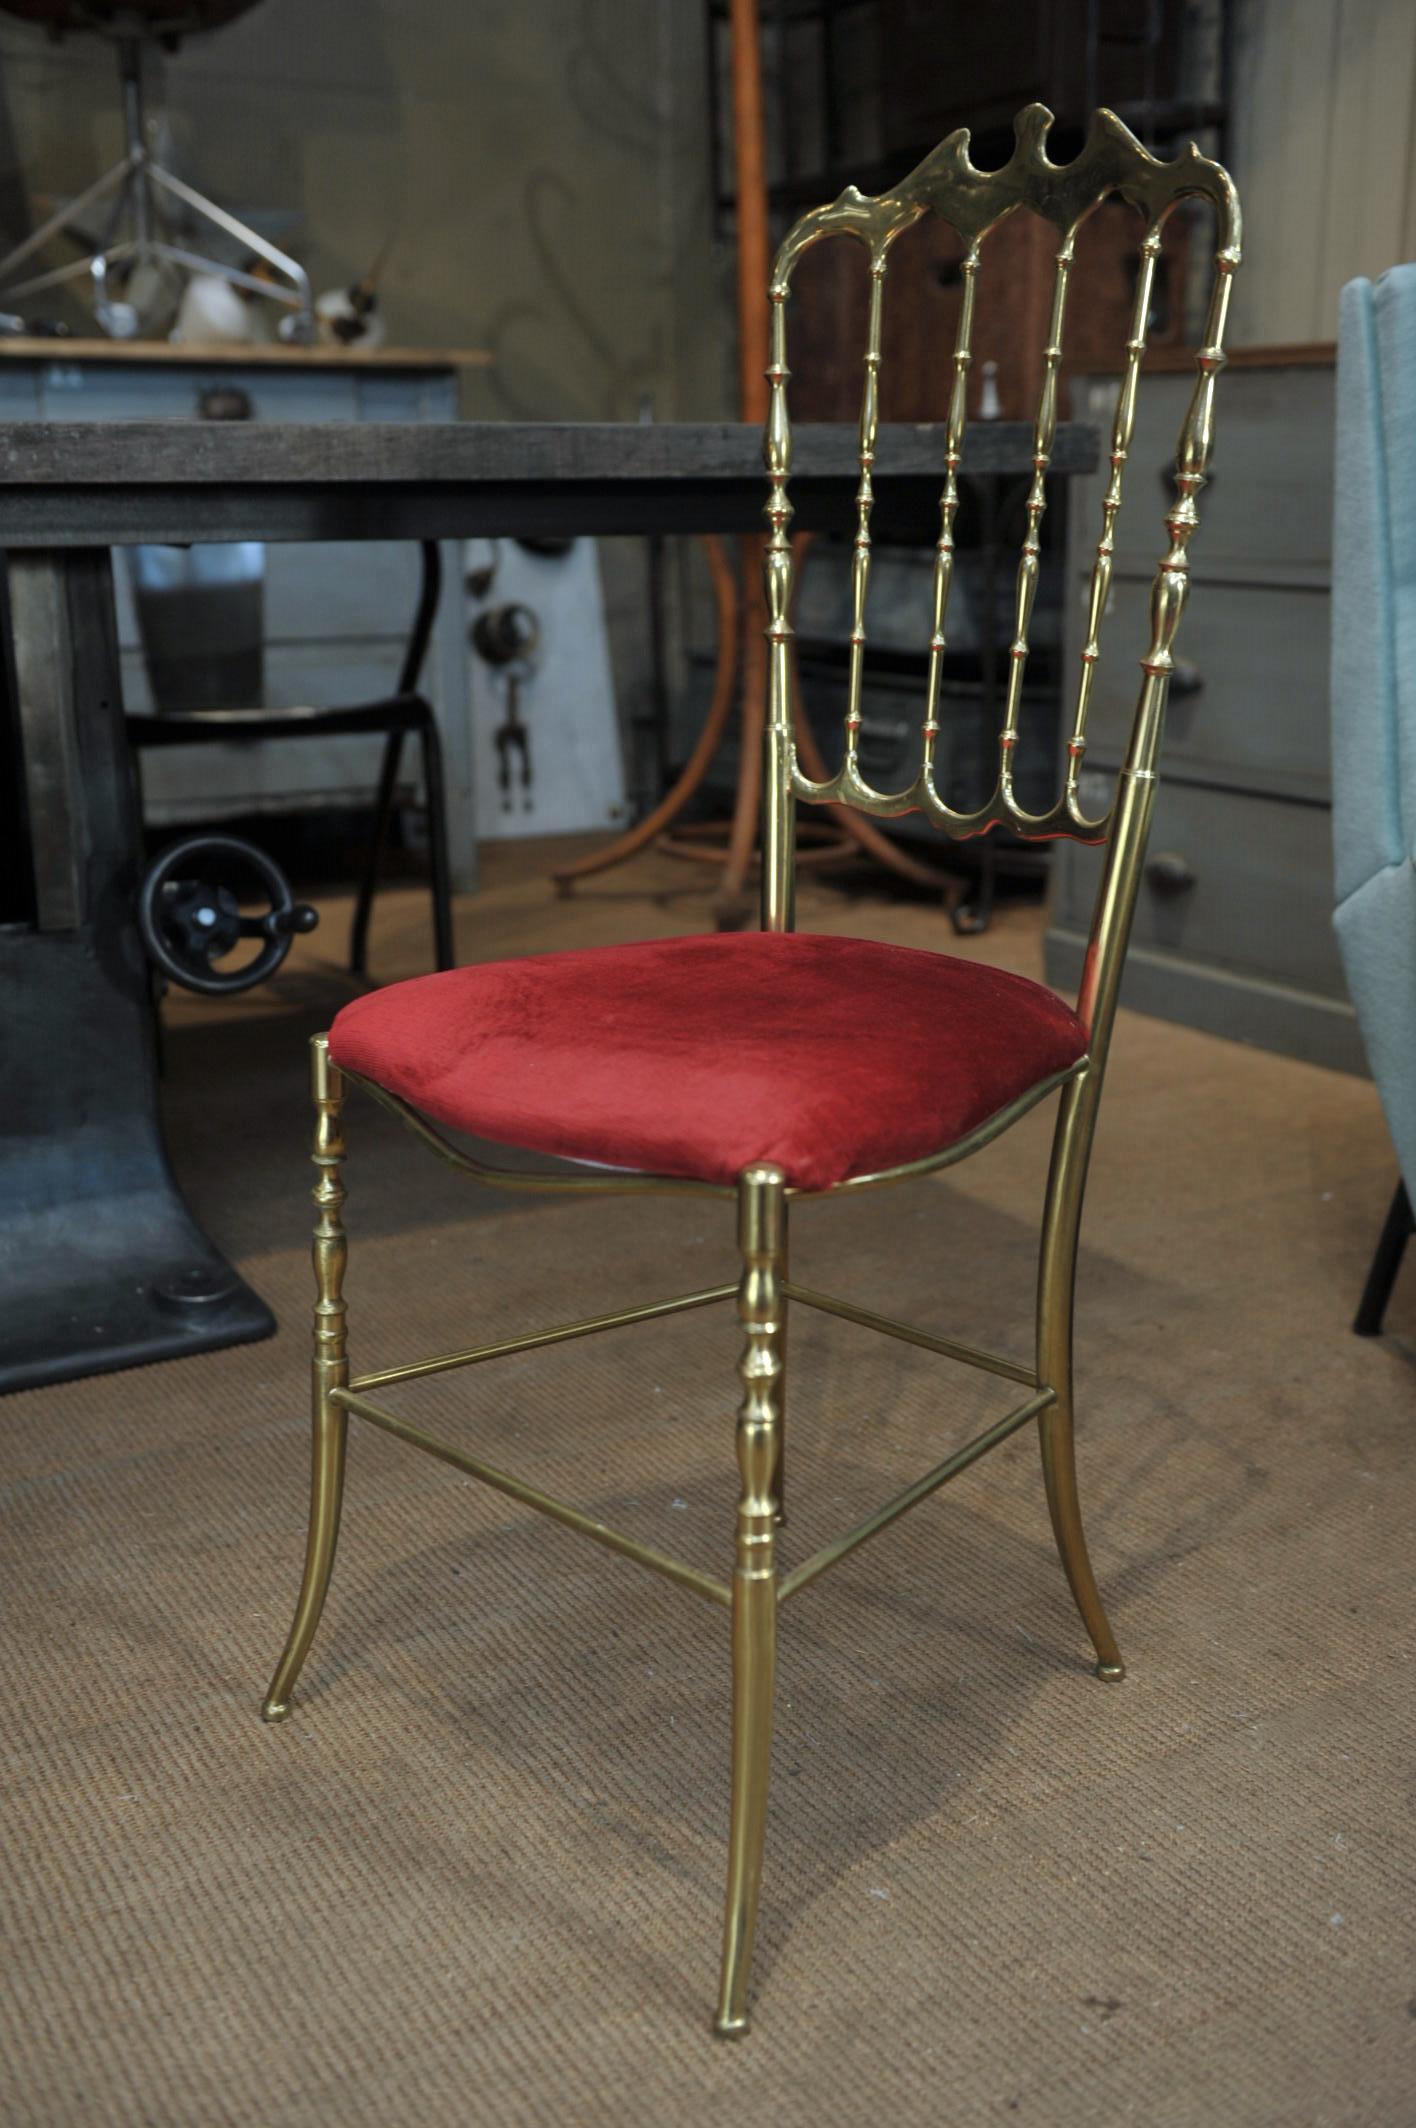 Chiavari chair made of brass, 1970.
Original red velvet fabric, manufactured in Italy. Very good condition.